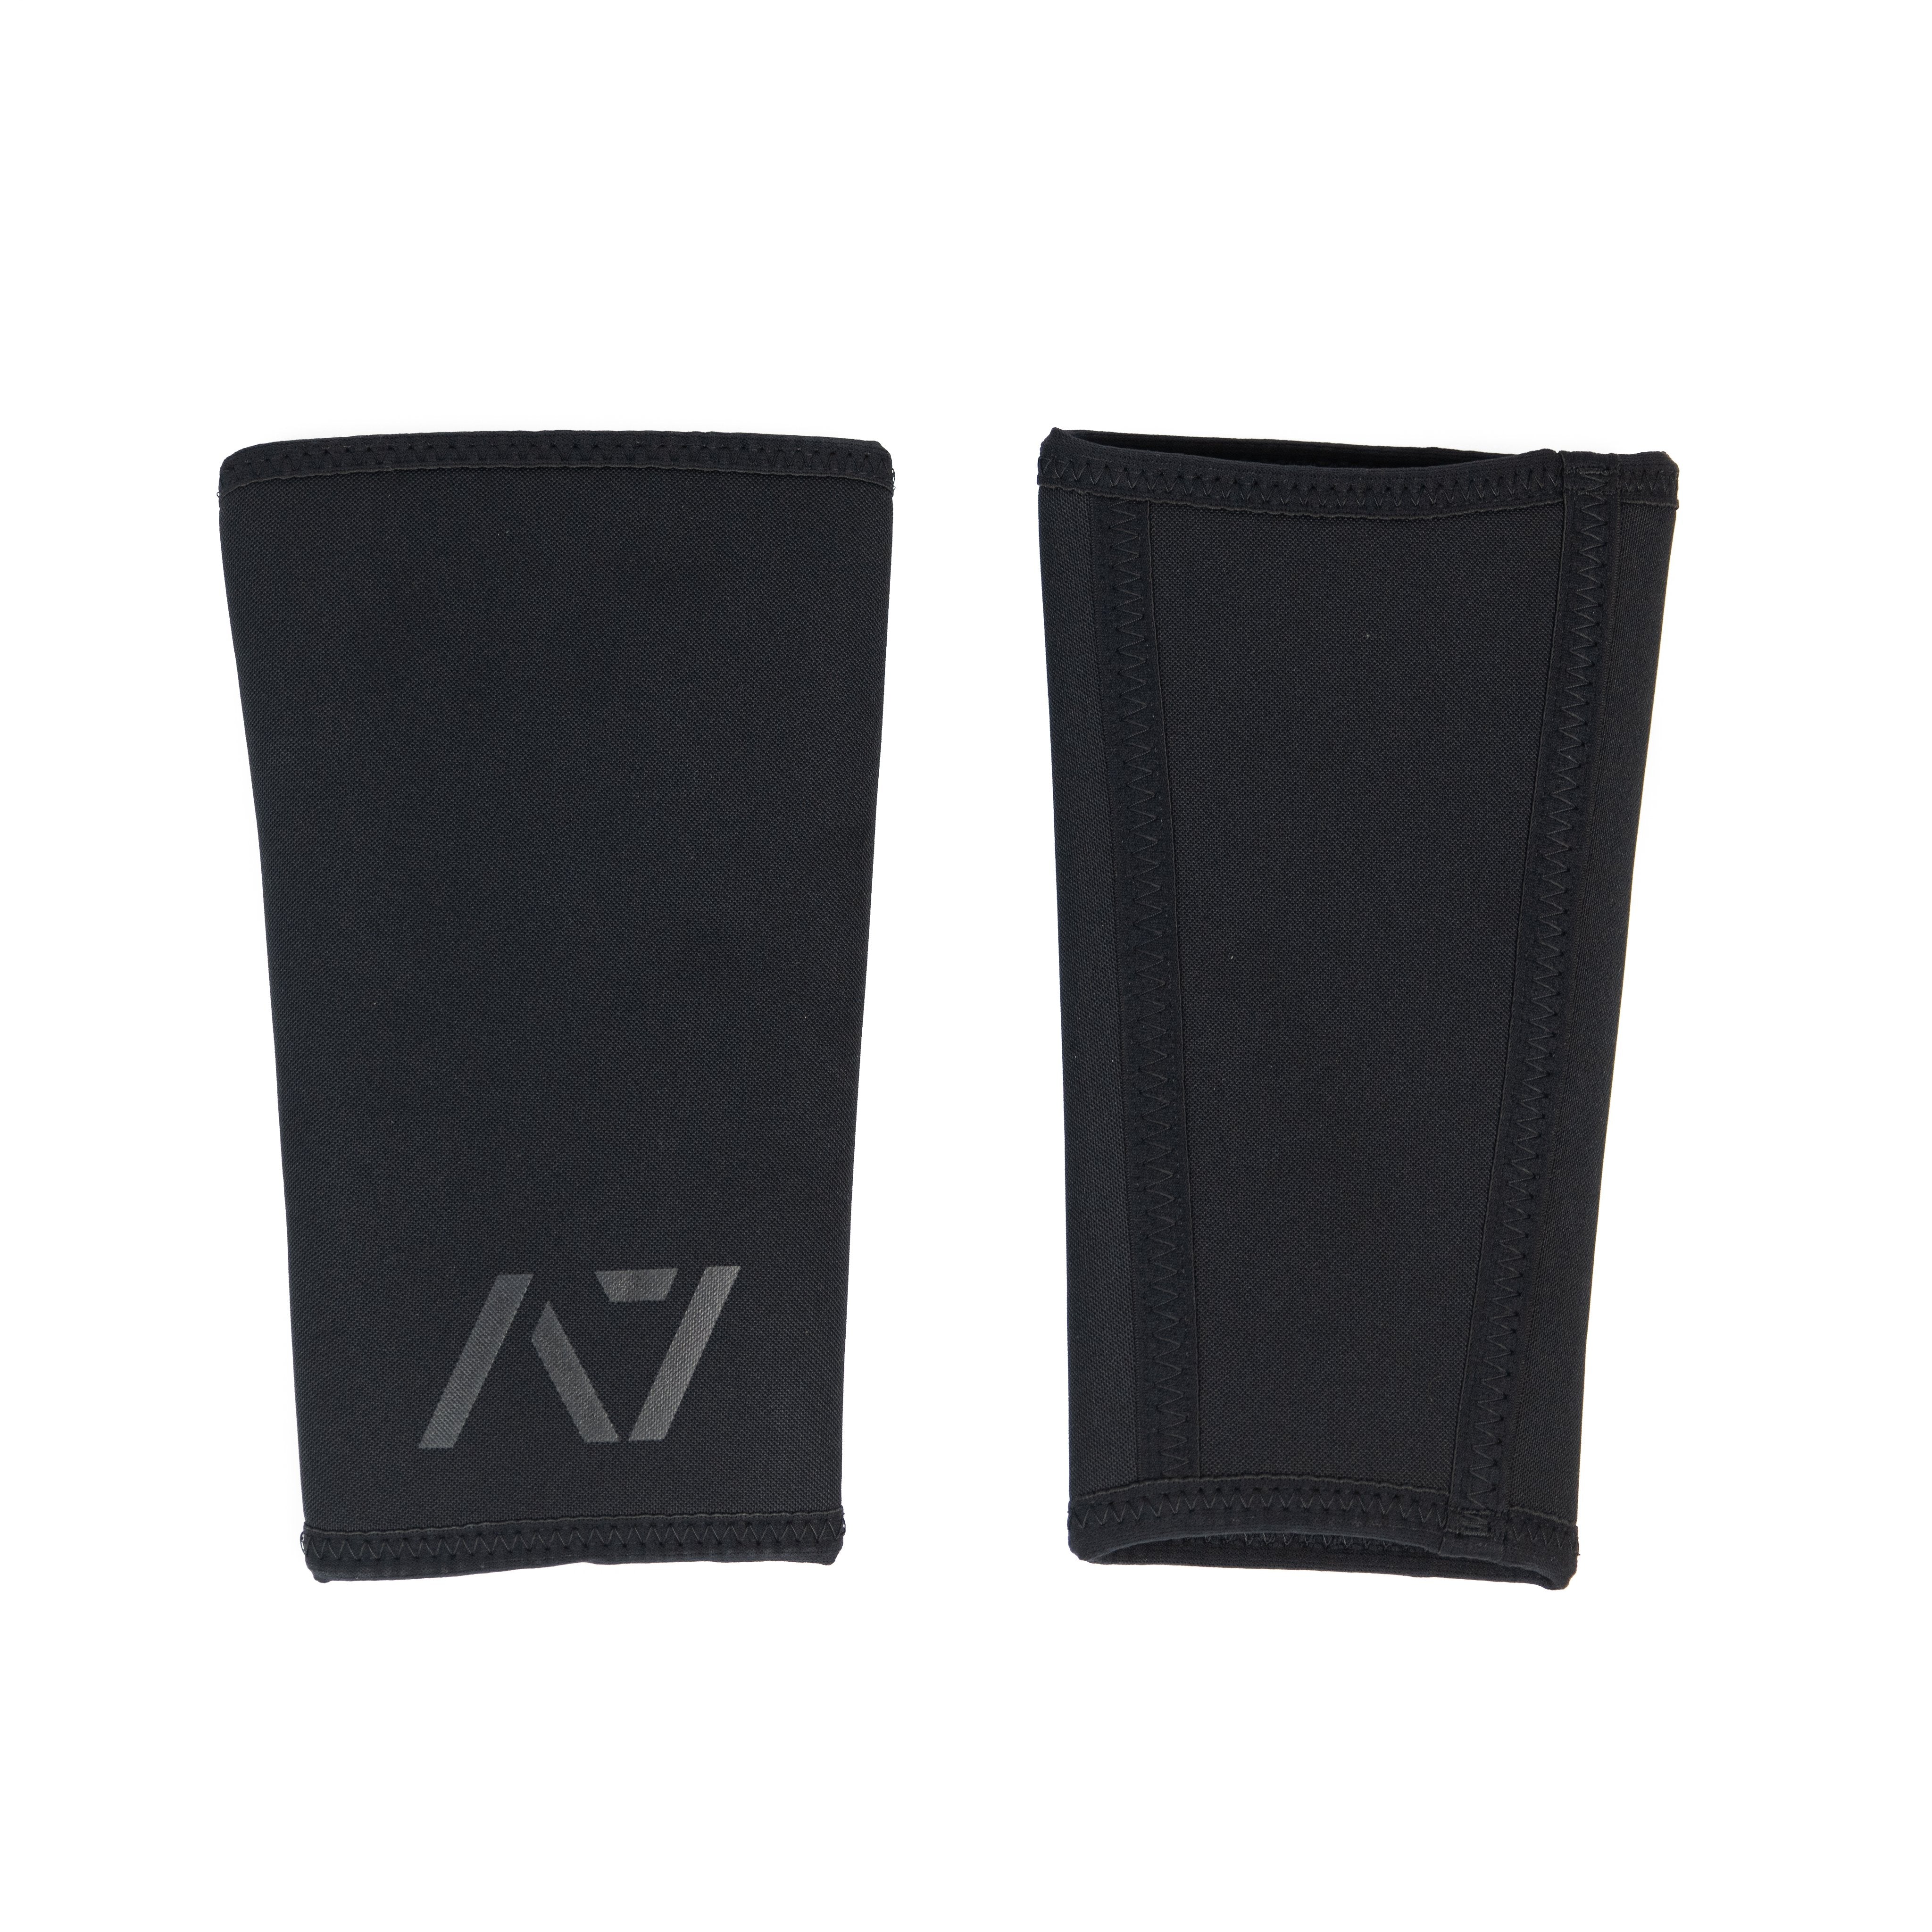 A7 Stealth Stiff knee sleeves are structured with a downward cut panel on the back of the quad and calf to ensure these have the ultimate compression at the knee joint. A7 CONE knee sleeves are IPF approved. Available in UK and Europe including France, Italy, Germany, Sweden and Poland.